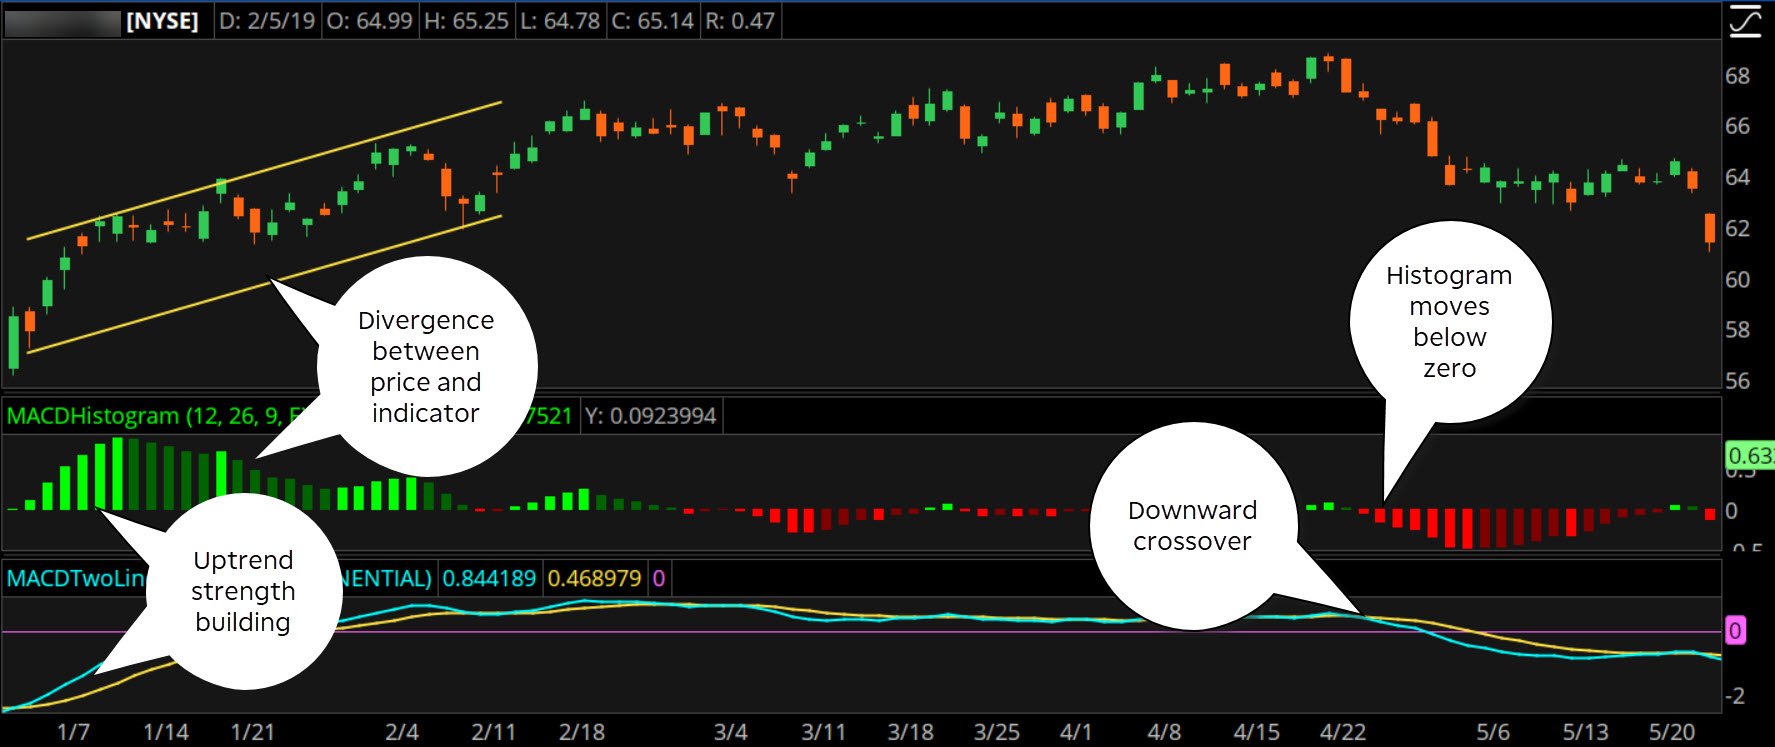 Price chart demonstrating MACD crossovers and divergences